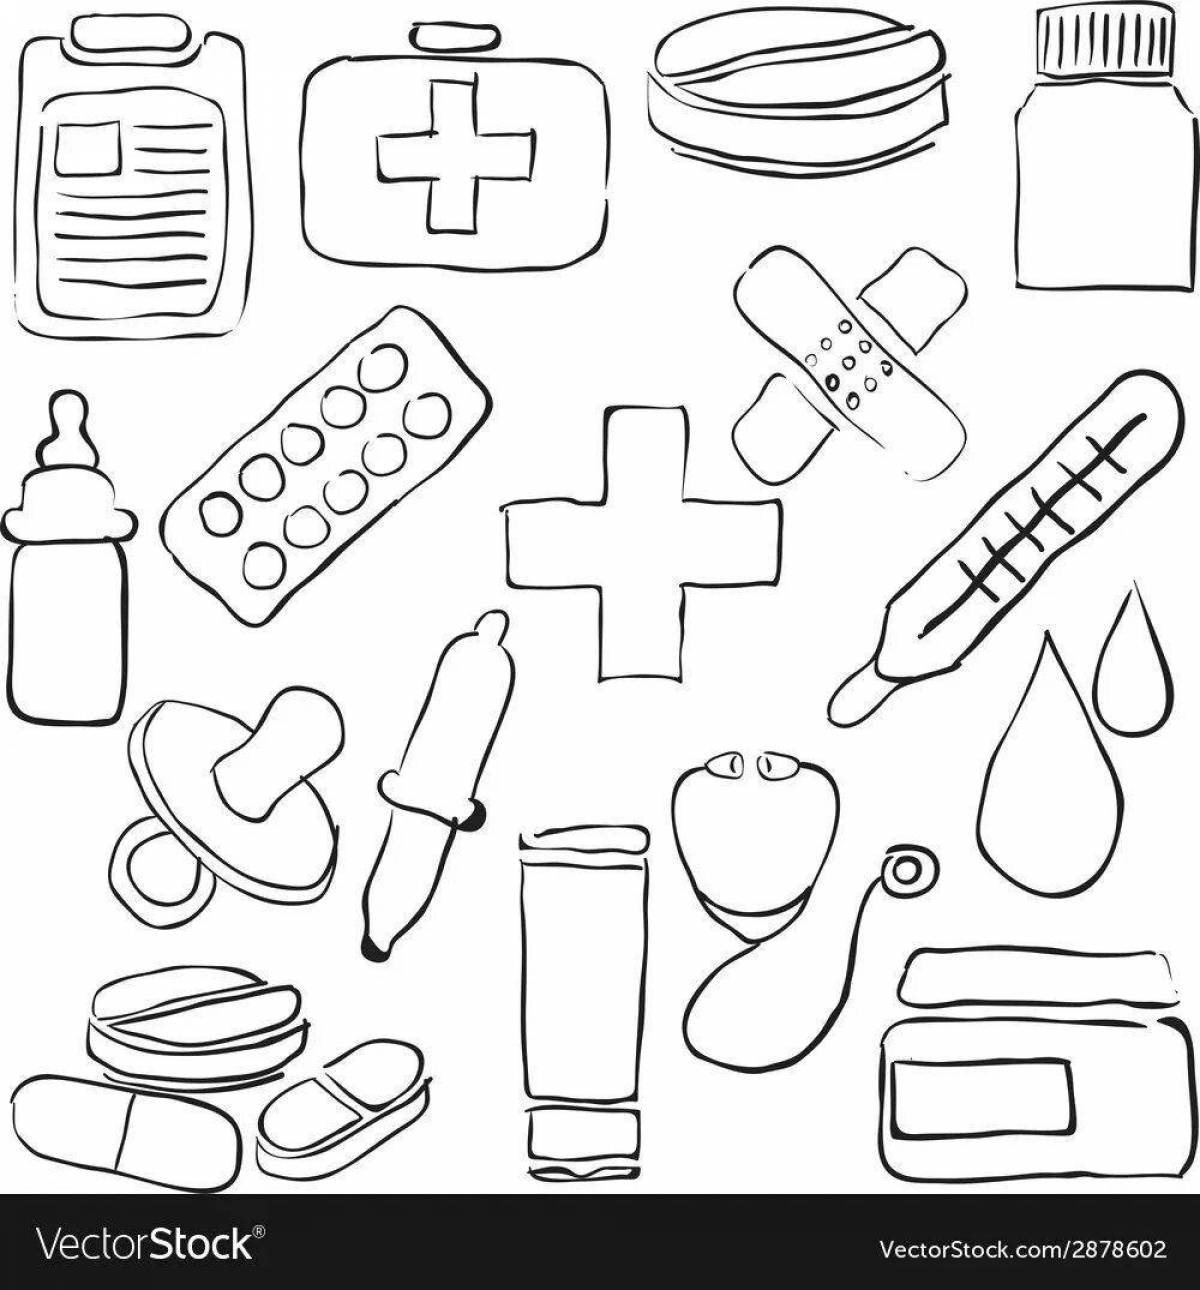 Colorful pharmacy coloring book